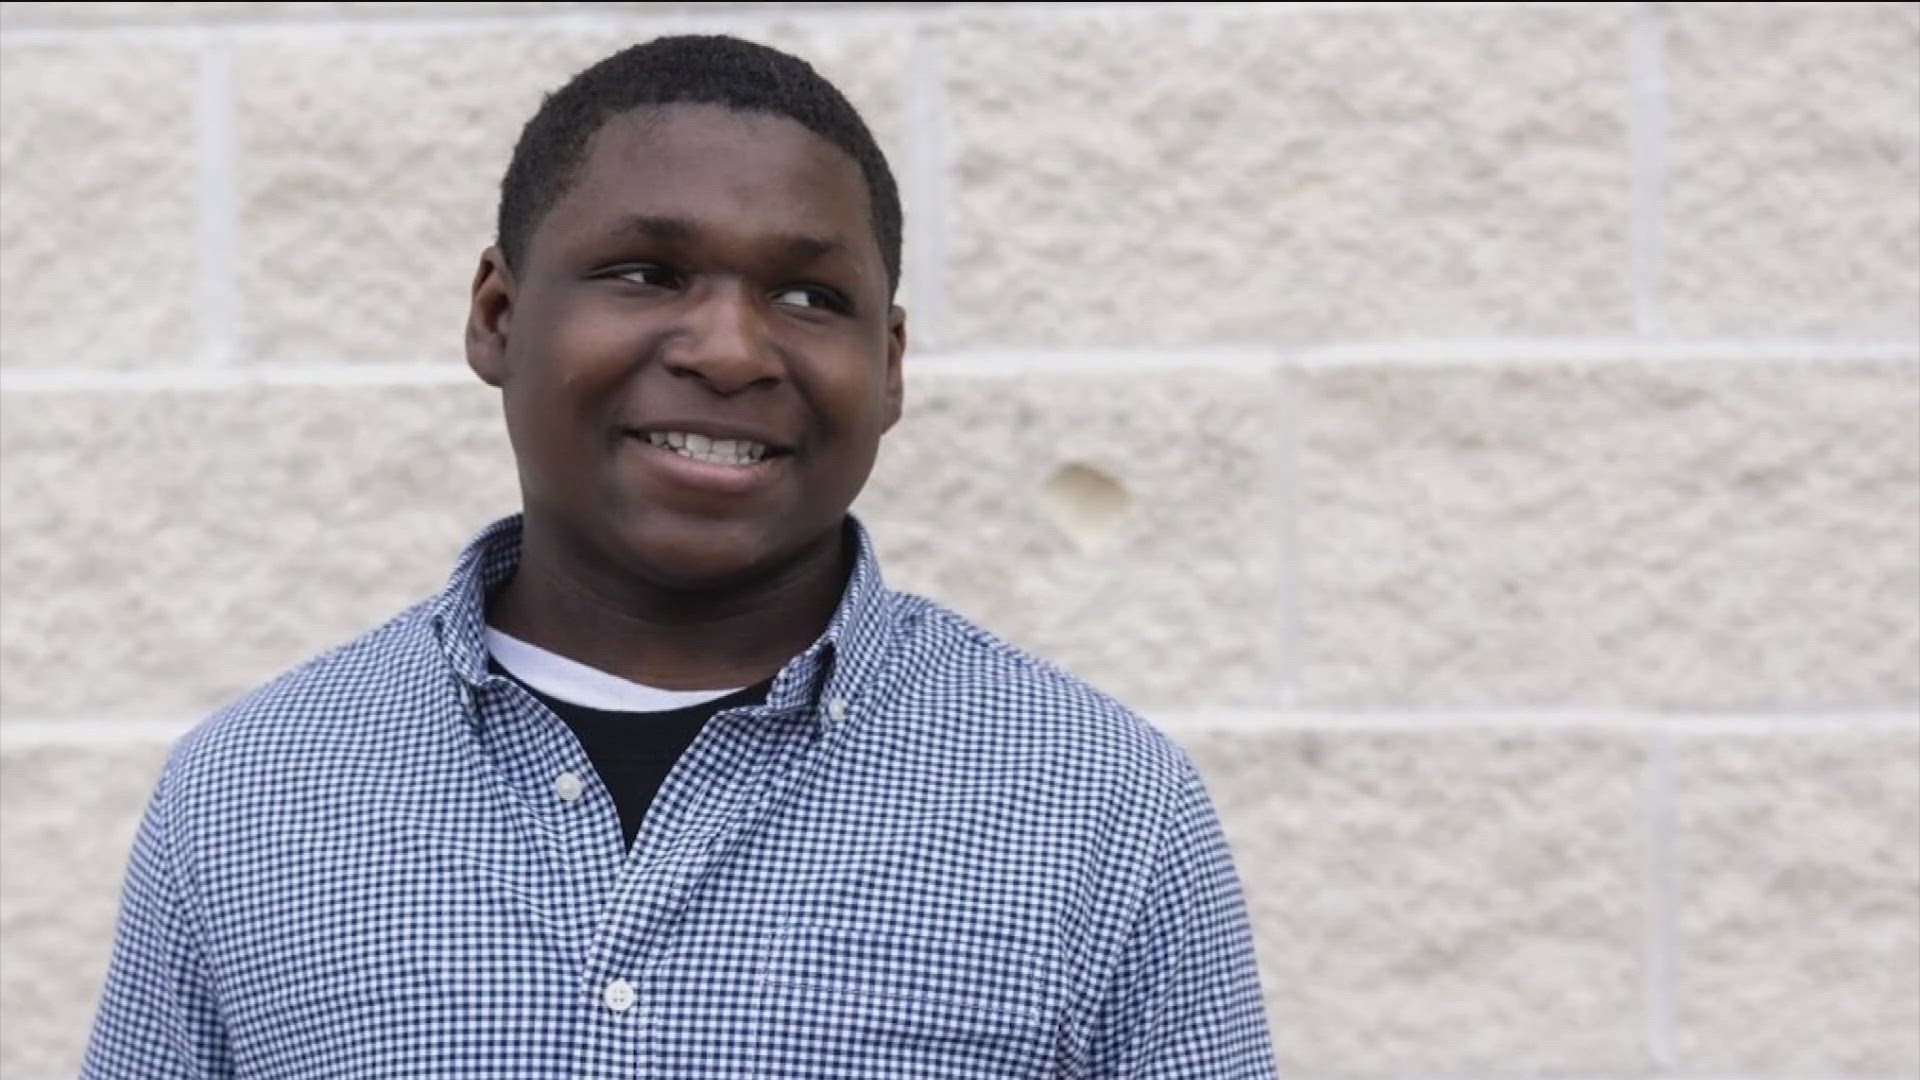 Every child that enters into Texas foster care comes from a different background, with different hardships. Some, like Enoch, have had especially rough journeys.